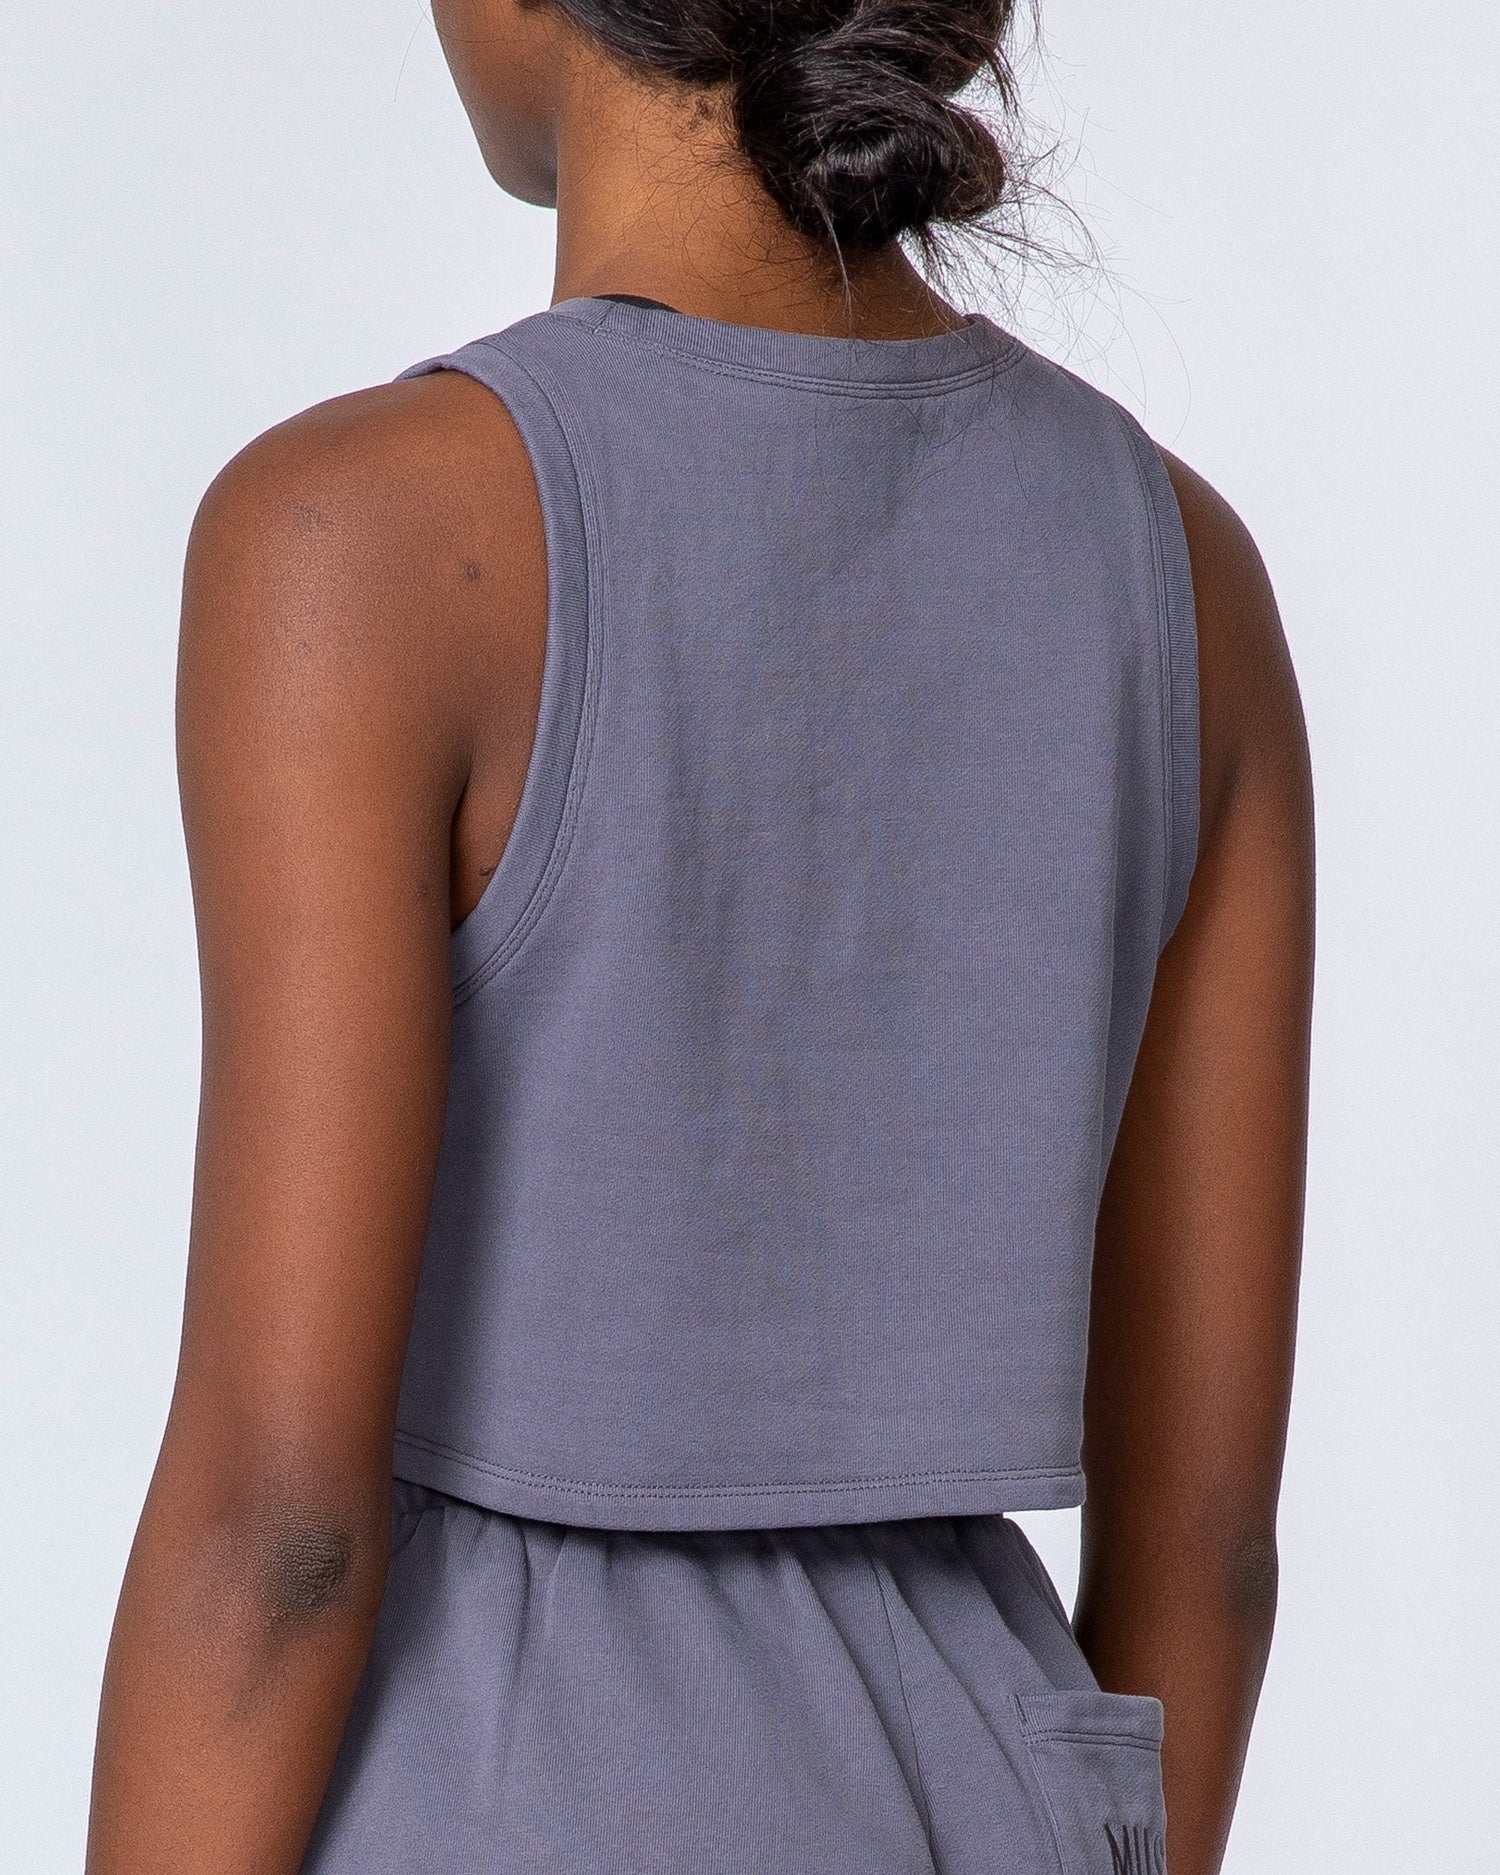 Cropped Rest Day Tank - Washed Sleet Grey